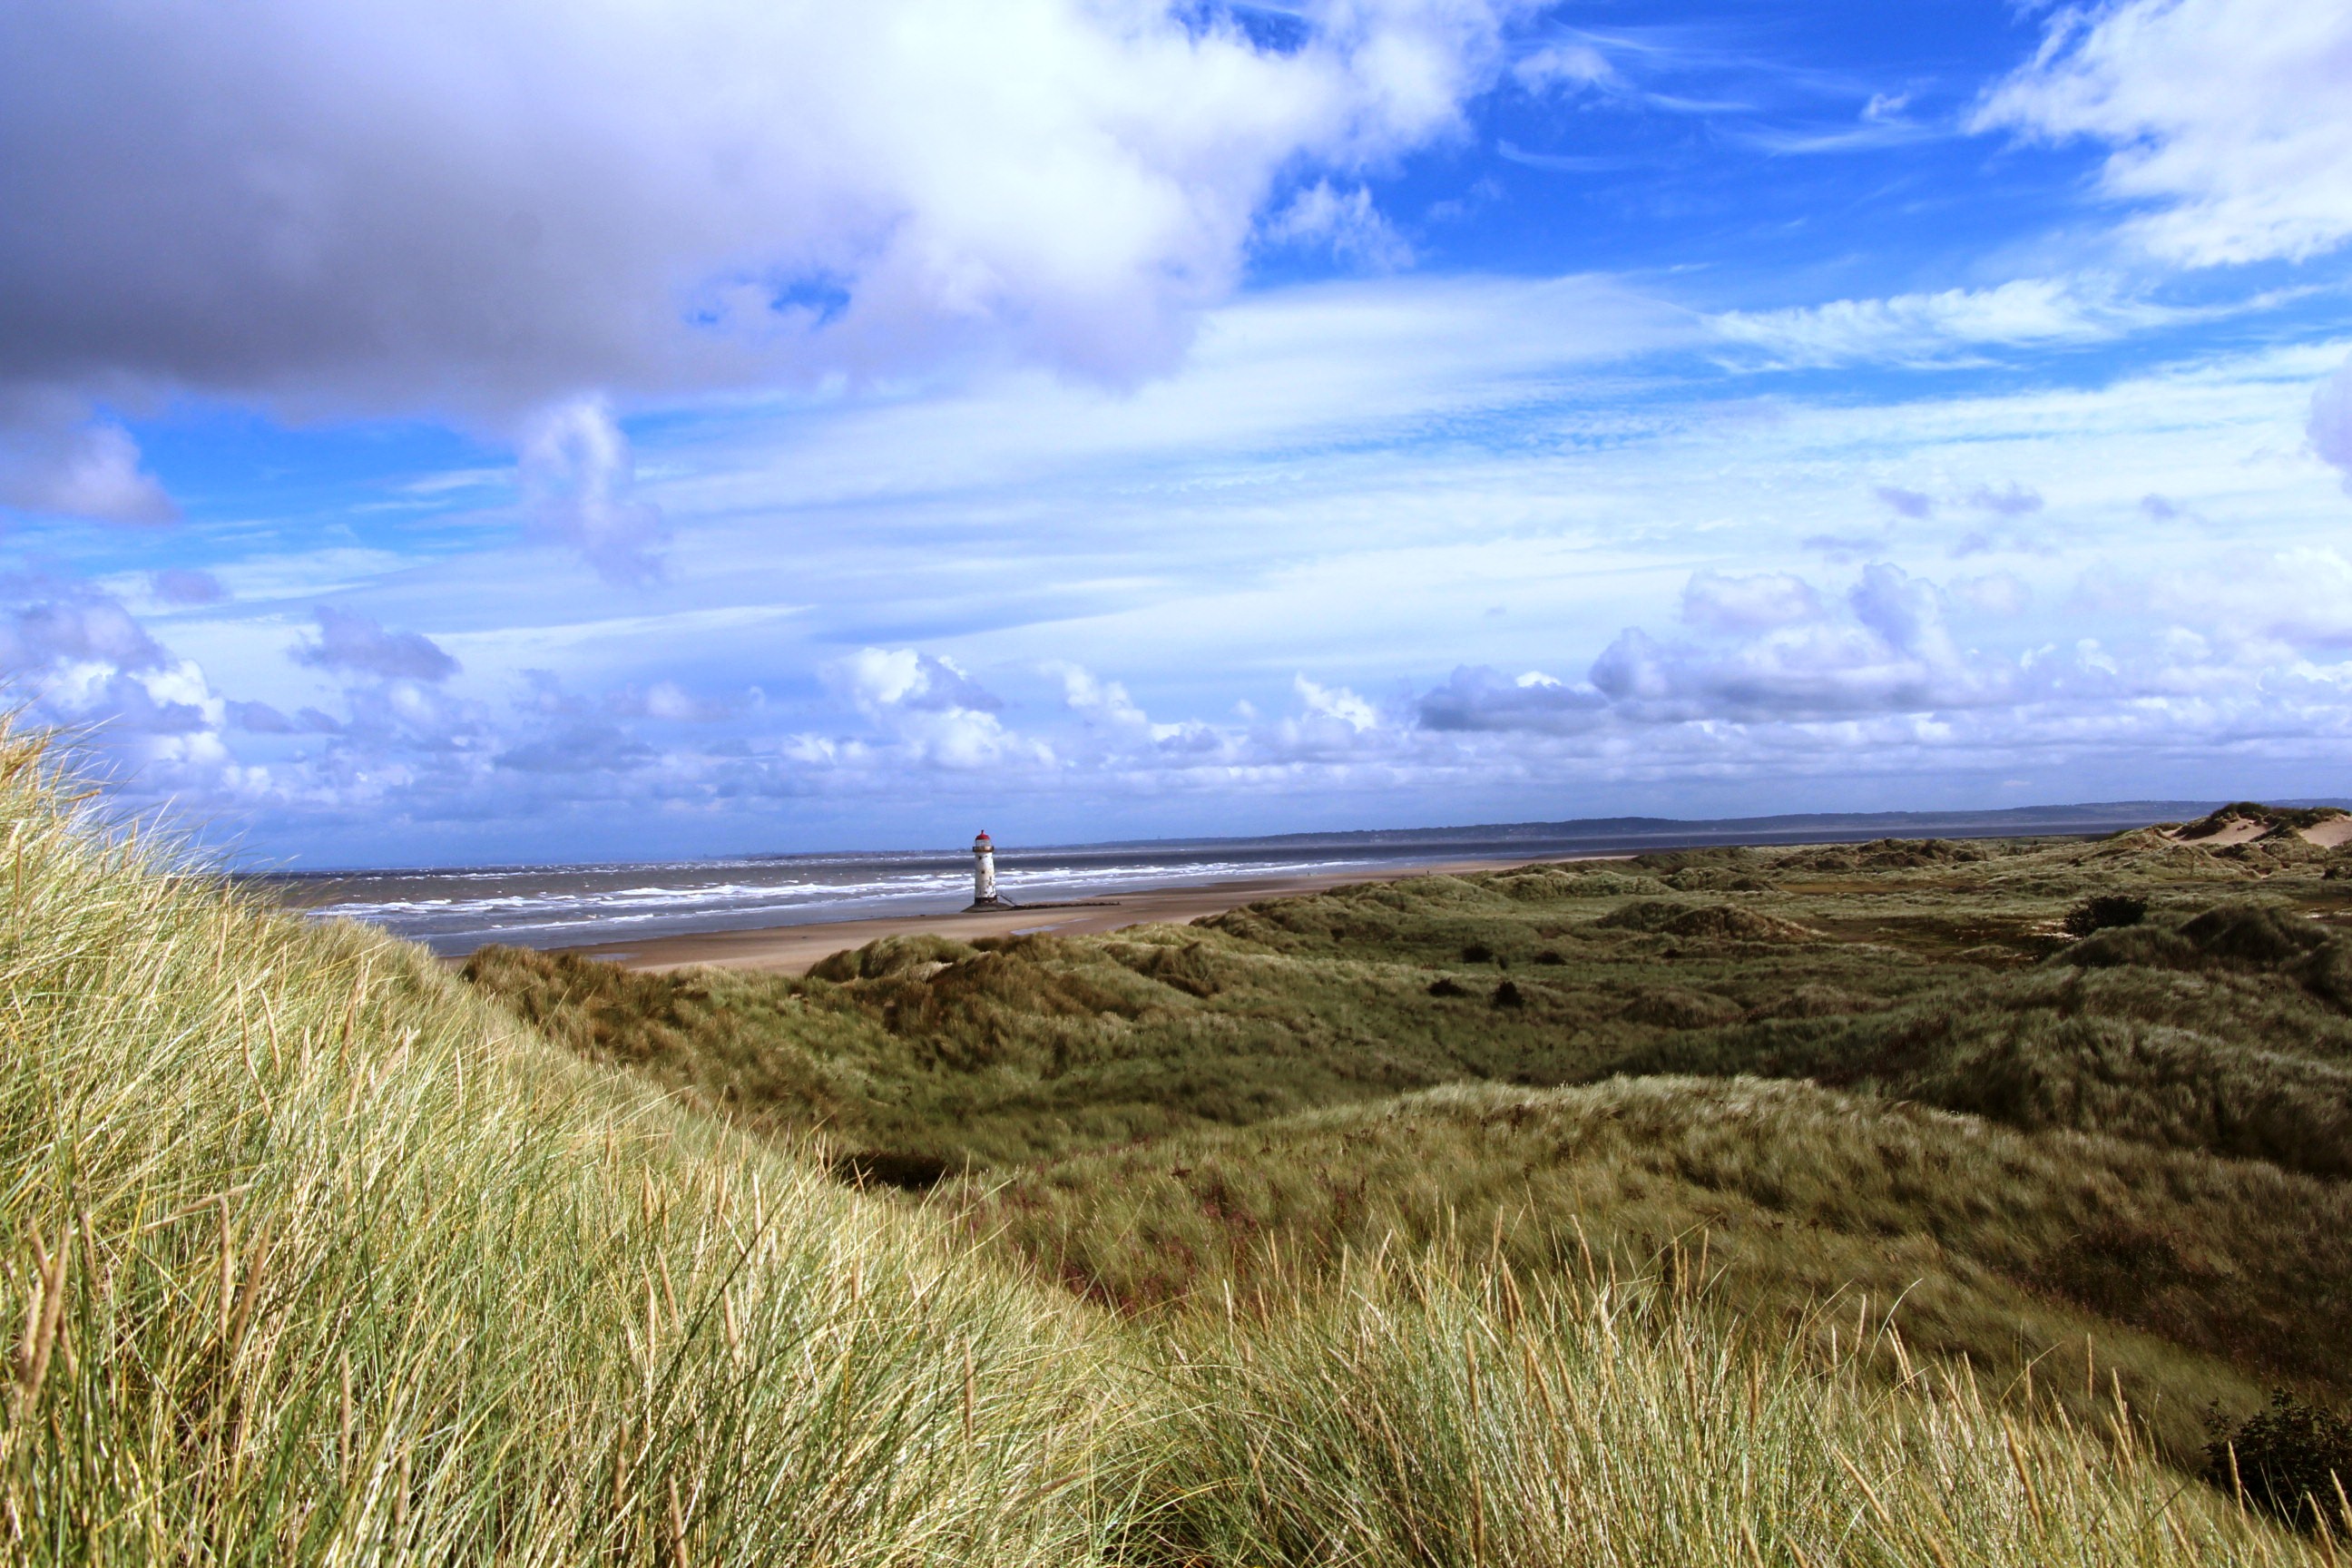 The sand dunes at Talacre - the lizards’ beautiful new home